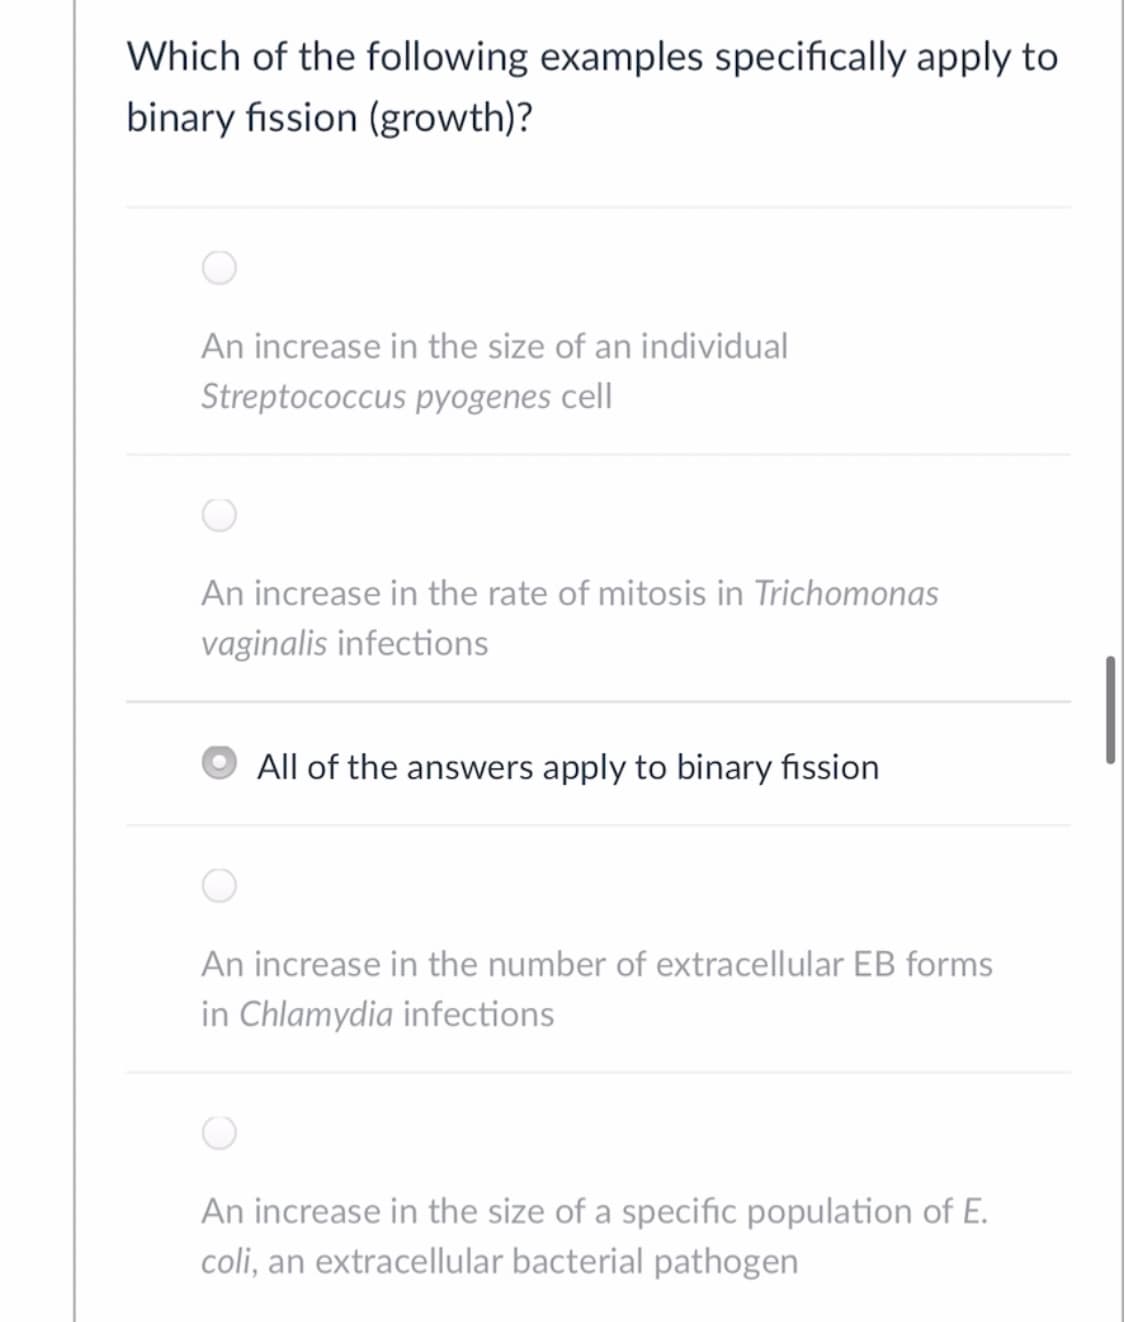 Which of the following examples specifically apply to
binary fission (growth)?
An increase in the size of an individual
Streptococcus pyogenes cell
An increase in the rate of mitosis in Trichomonas
vaginalis infections
All of the answers apply to binary fission
An increase in the number of extracellular EB forms
in Chlamydia infections
An increase in the size of a specific population of E.
coli, an extracellular bacterial pathogen
